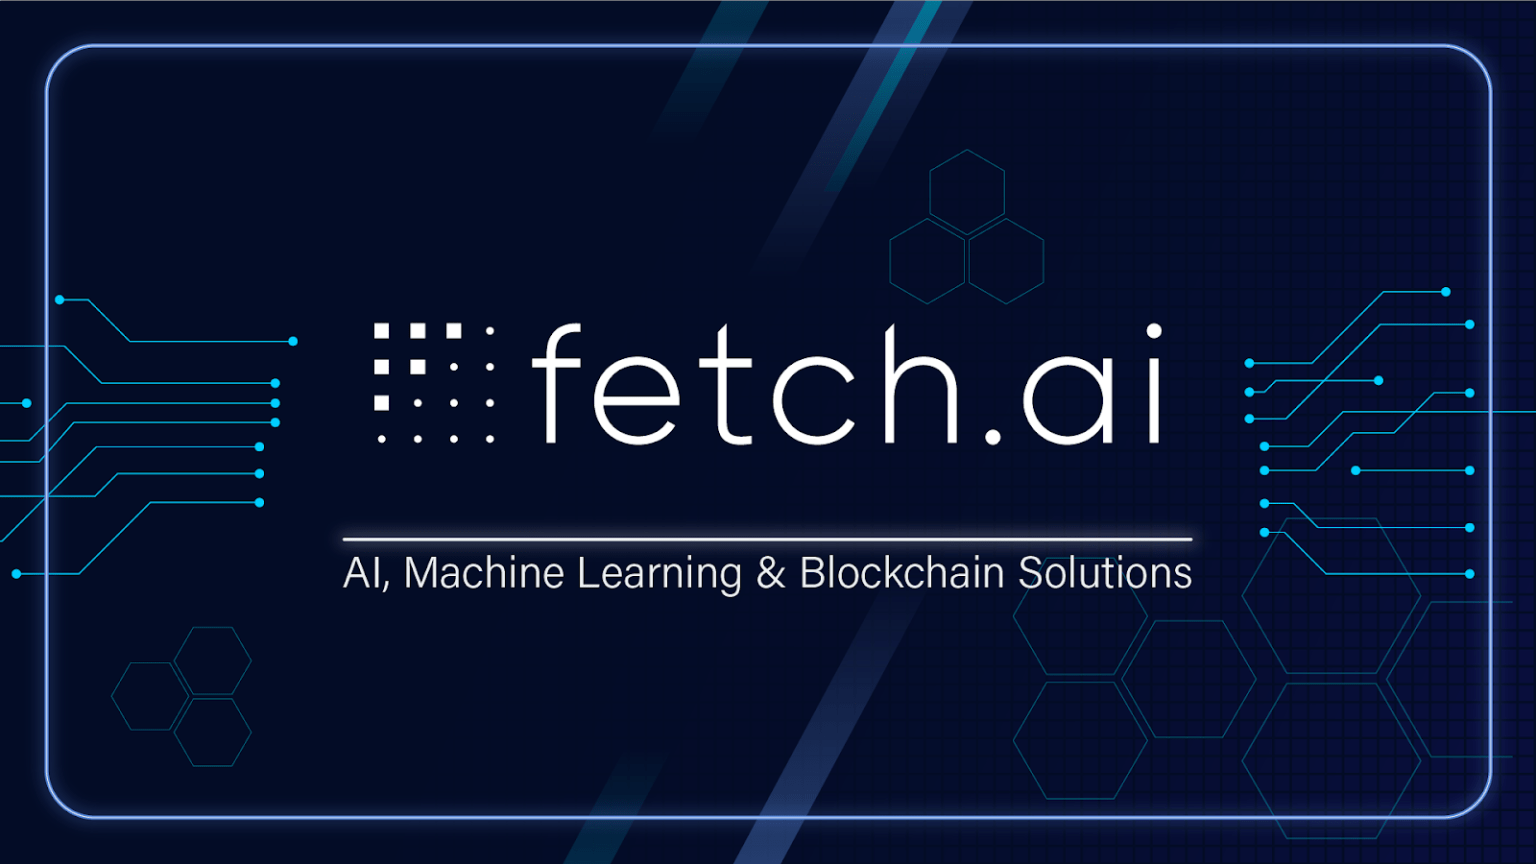 Fetch.ai Poised to Revolutionize the Machine Learning Industry with Blockchain Technology